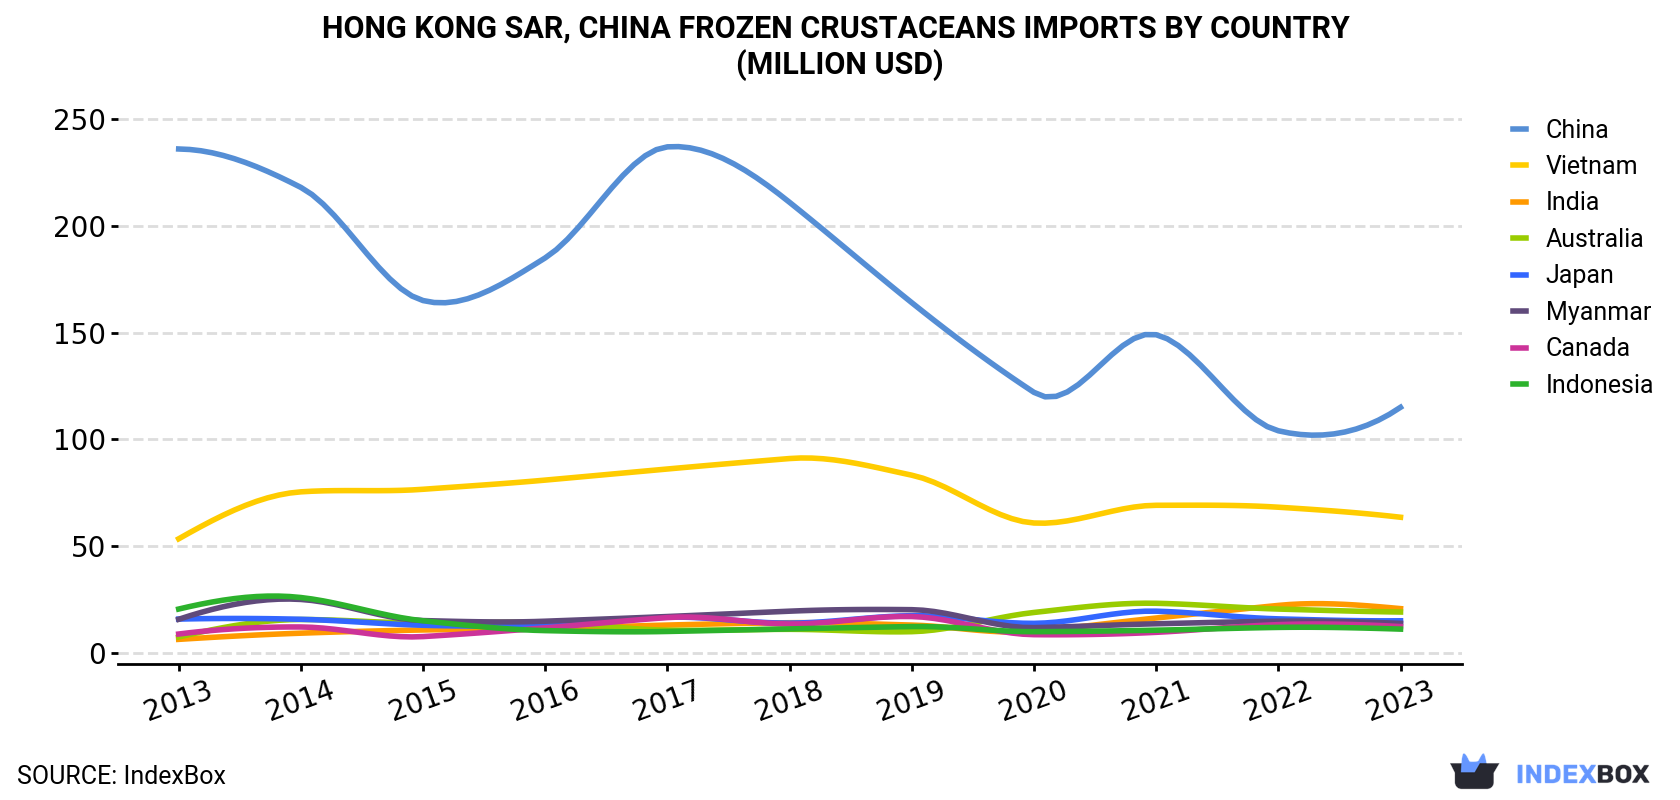 Hong Kong Frozen Crustaceans Imports By Country (Million USD)